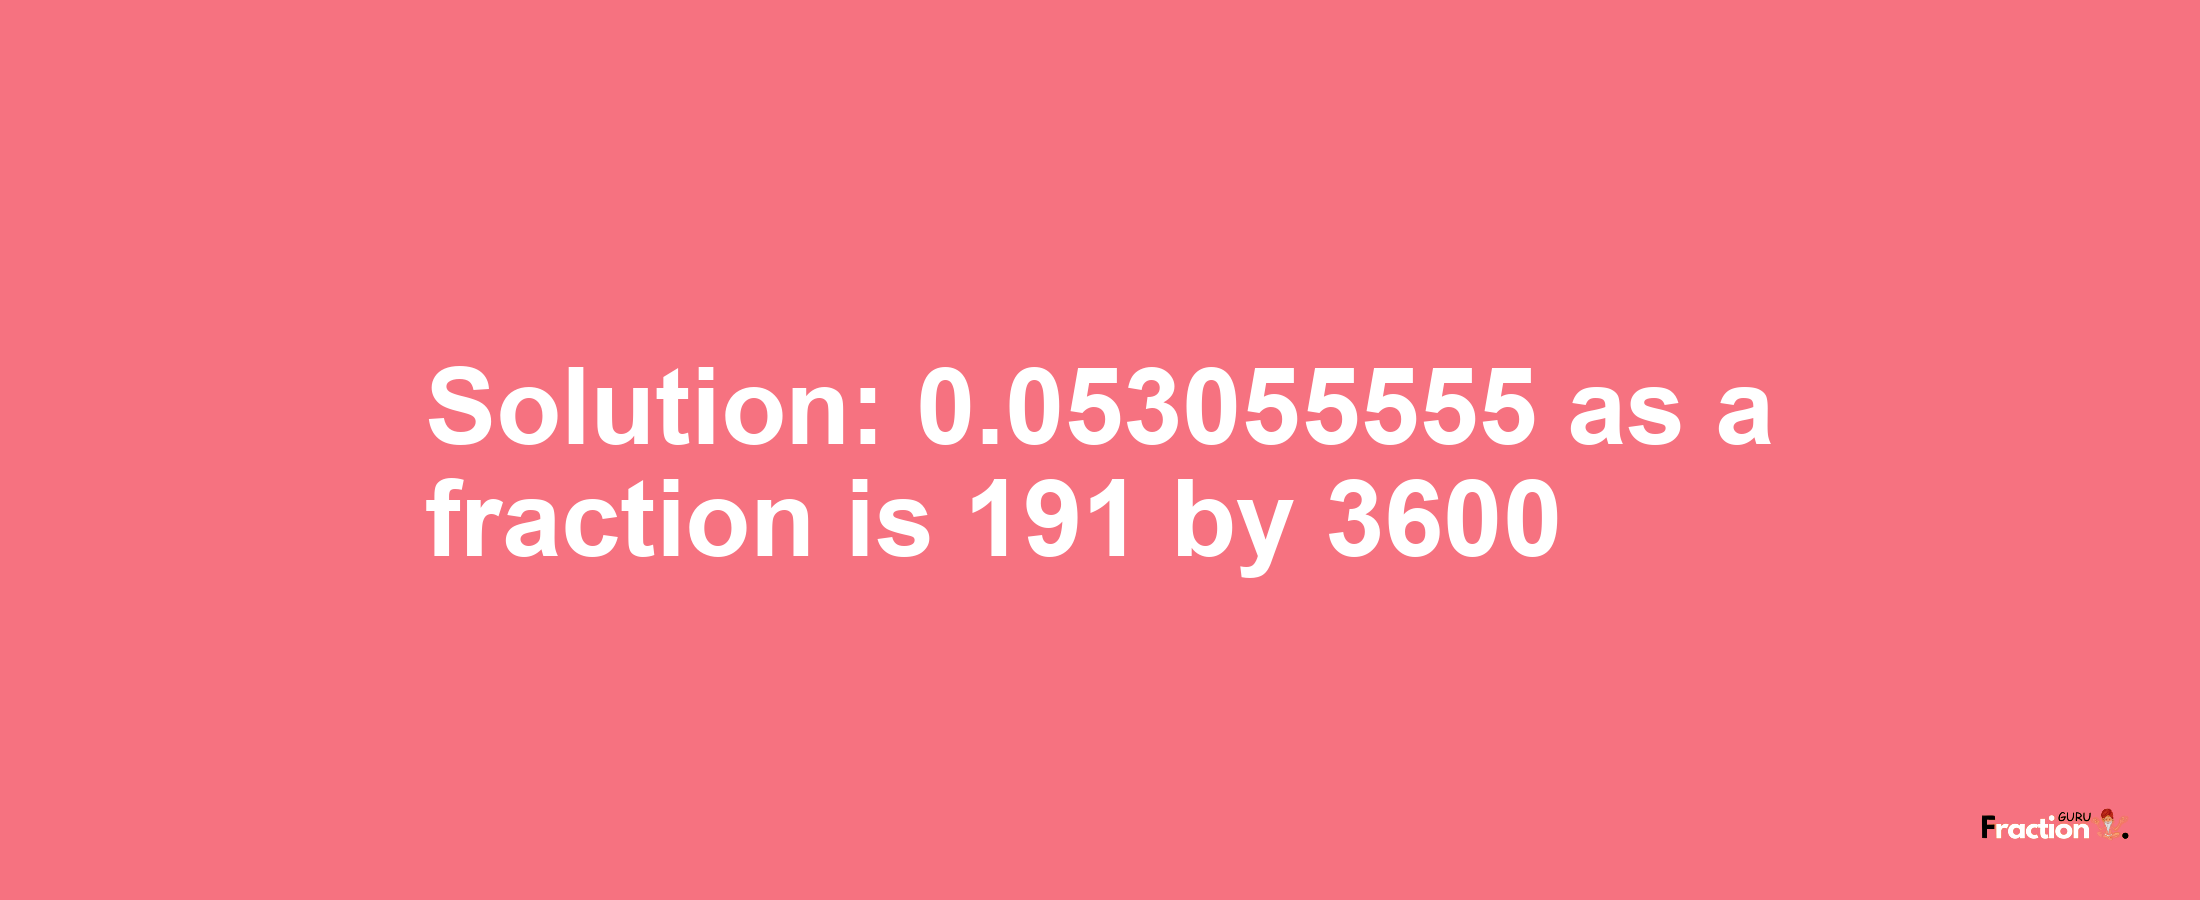 Solution:0.053055555 as a fraction is 191/3600